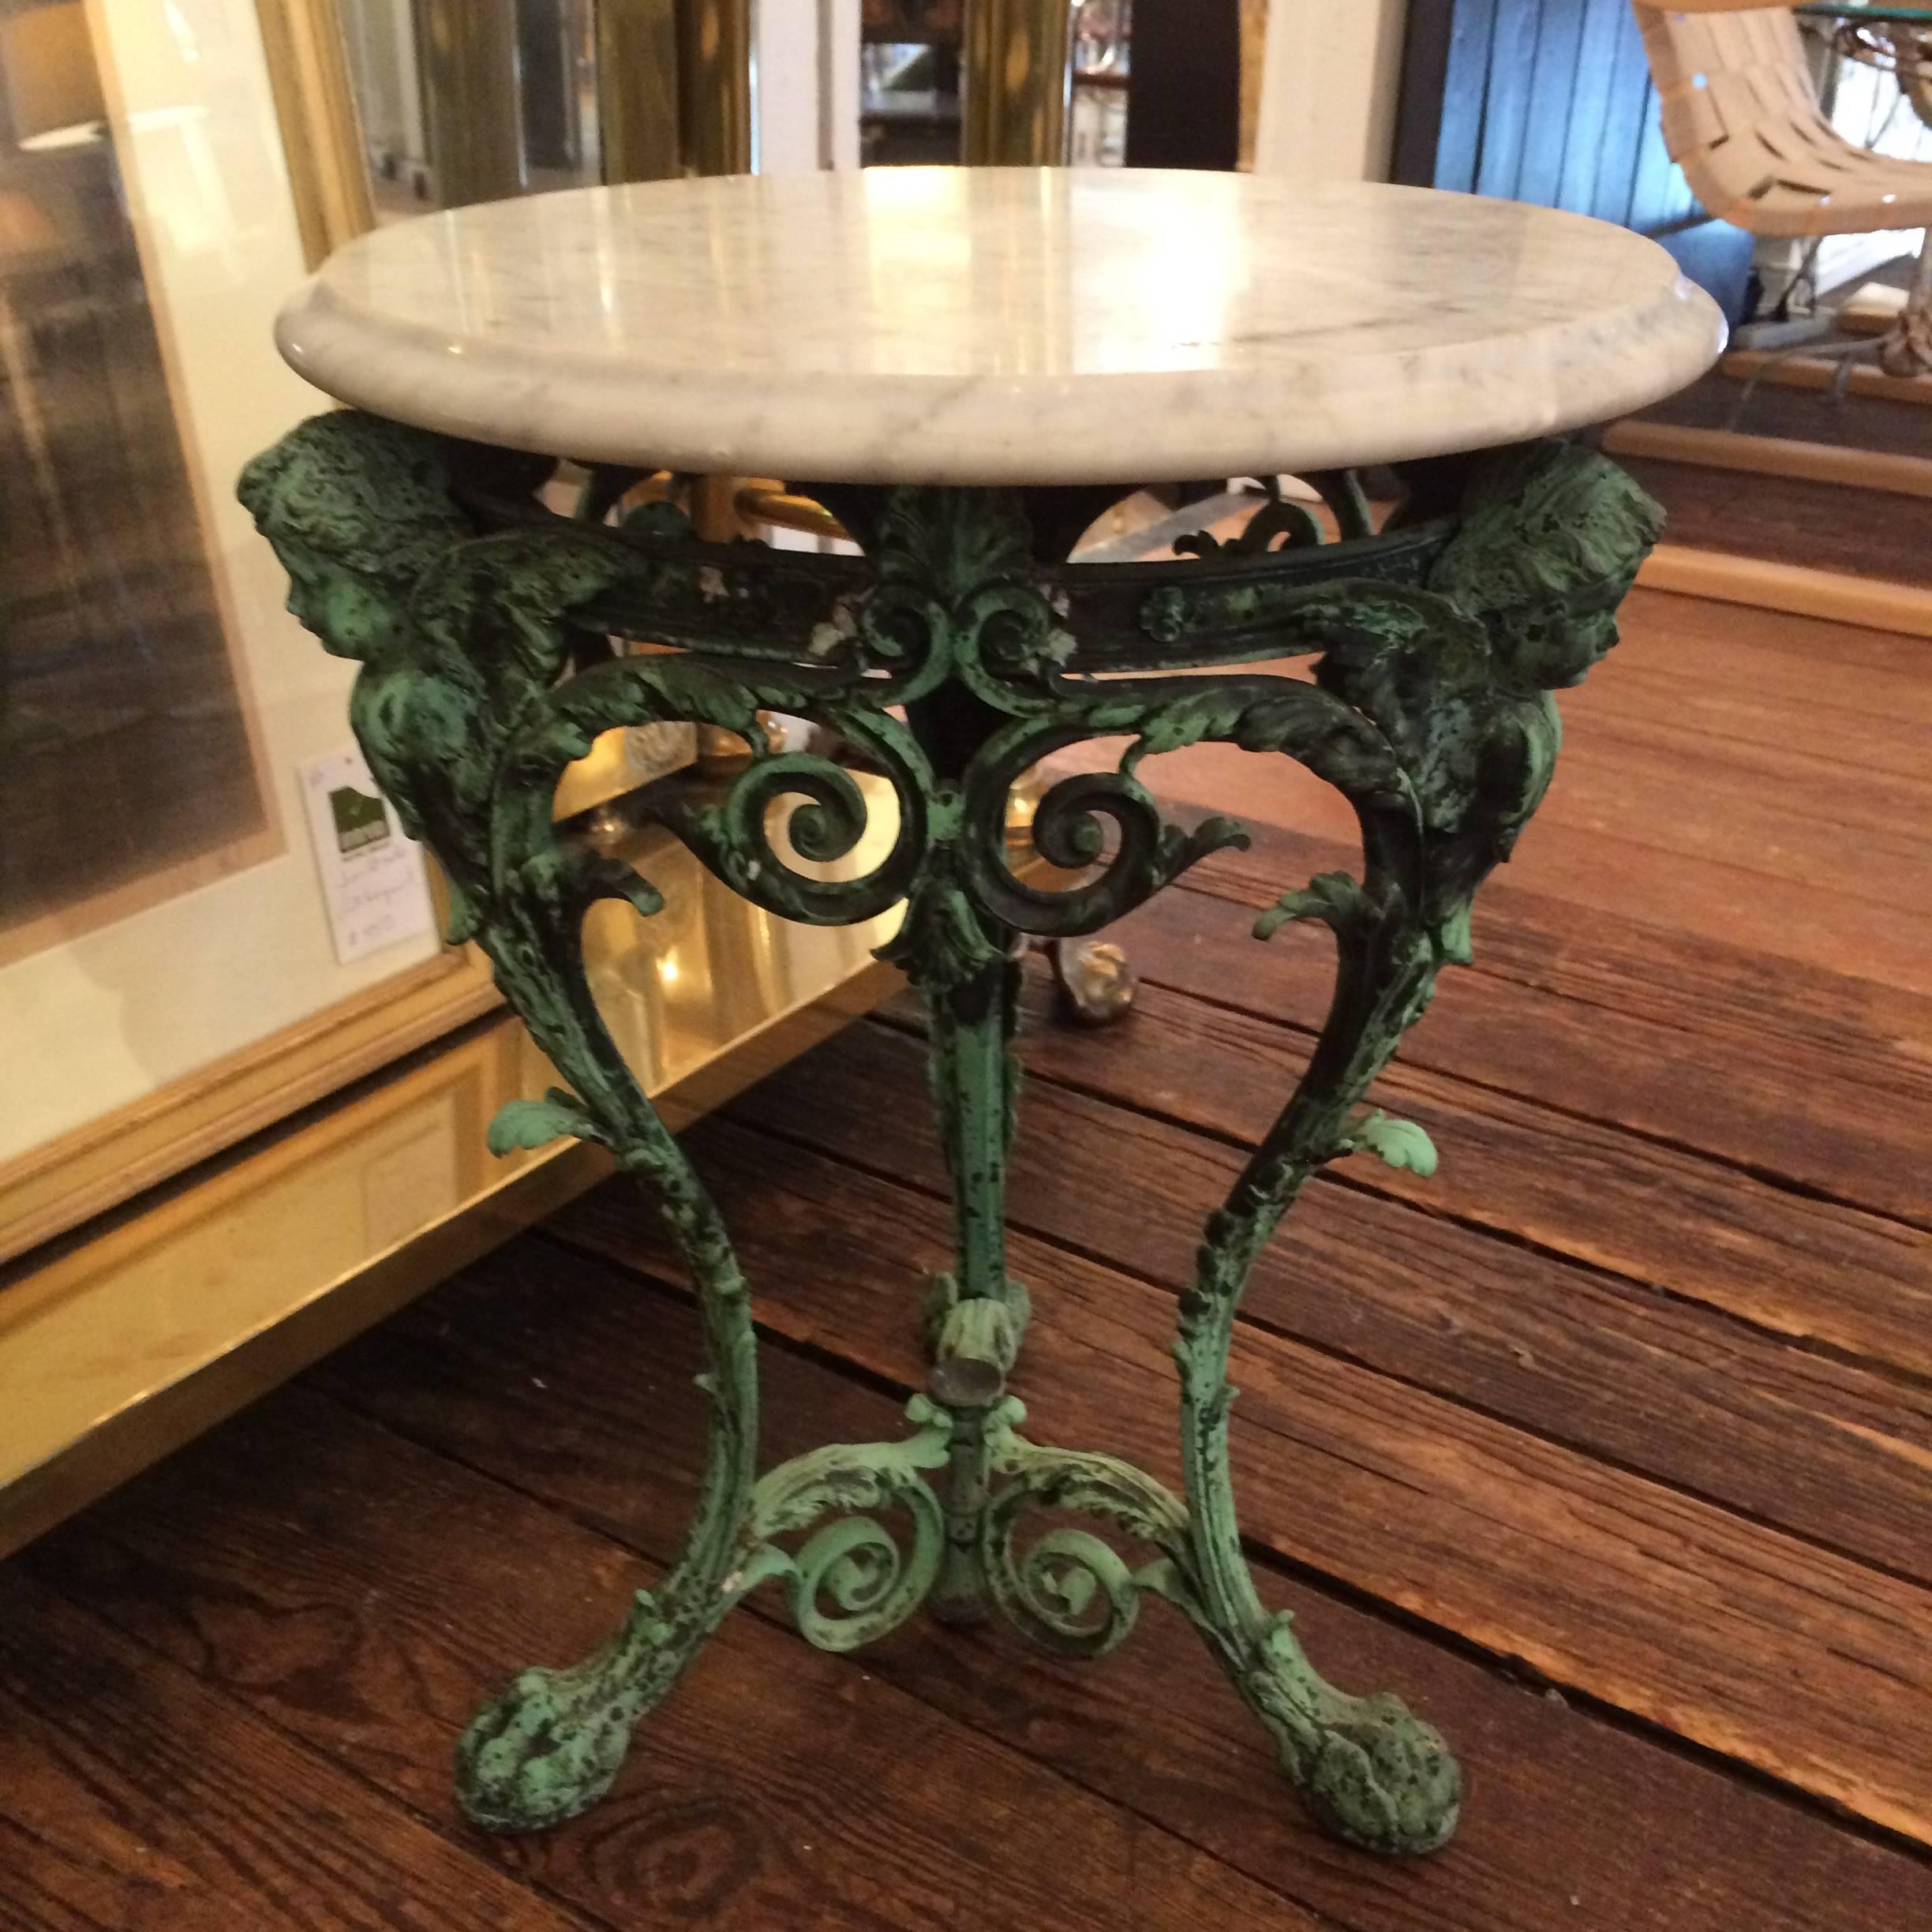 Gorgeous little side or drinks table with an ornate iron base with curlicues and putti, with an verdigris patina. A round white marble top rests on top.